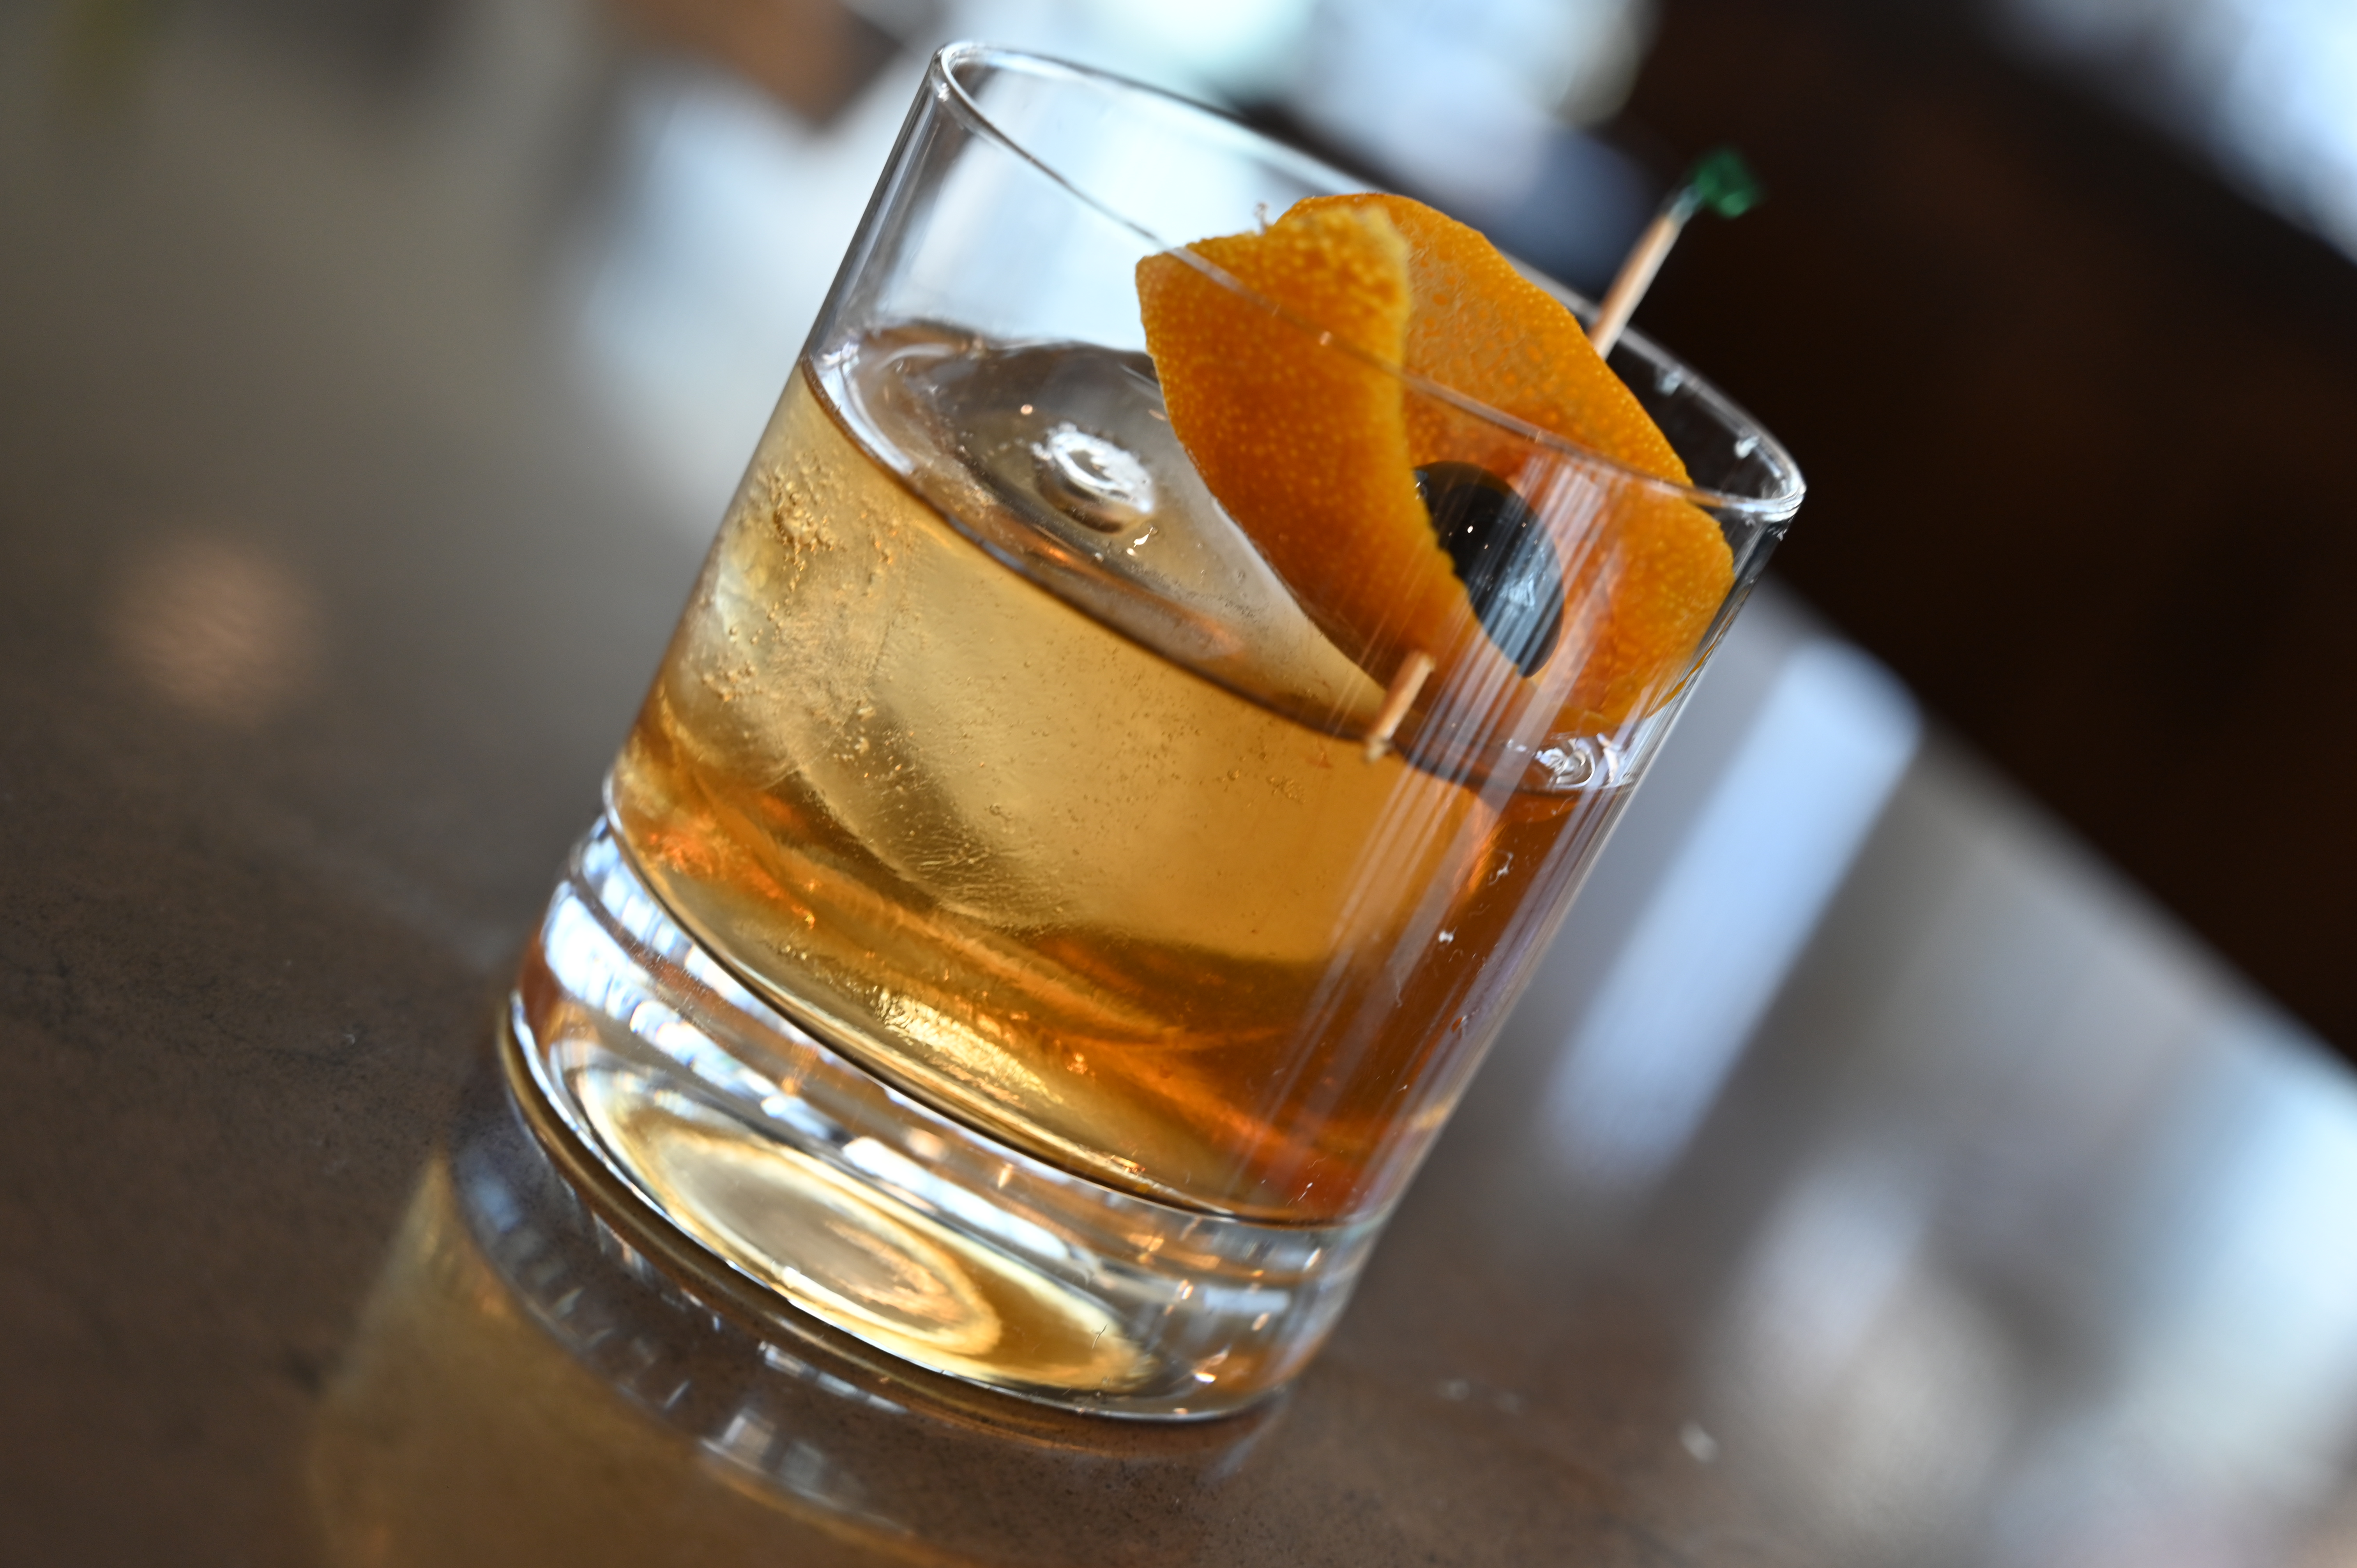 A handmade Smoked Old Fashioned, a hit with the residents